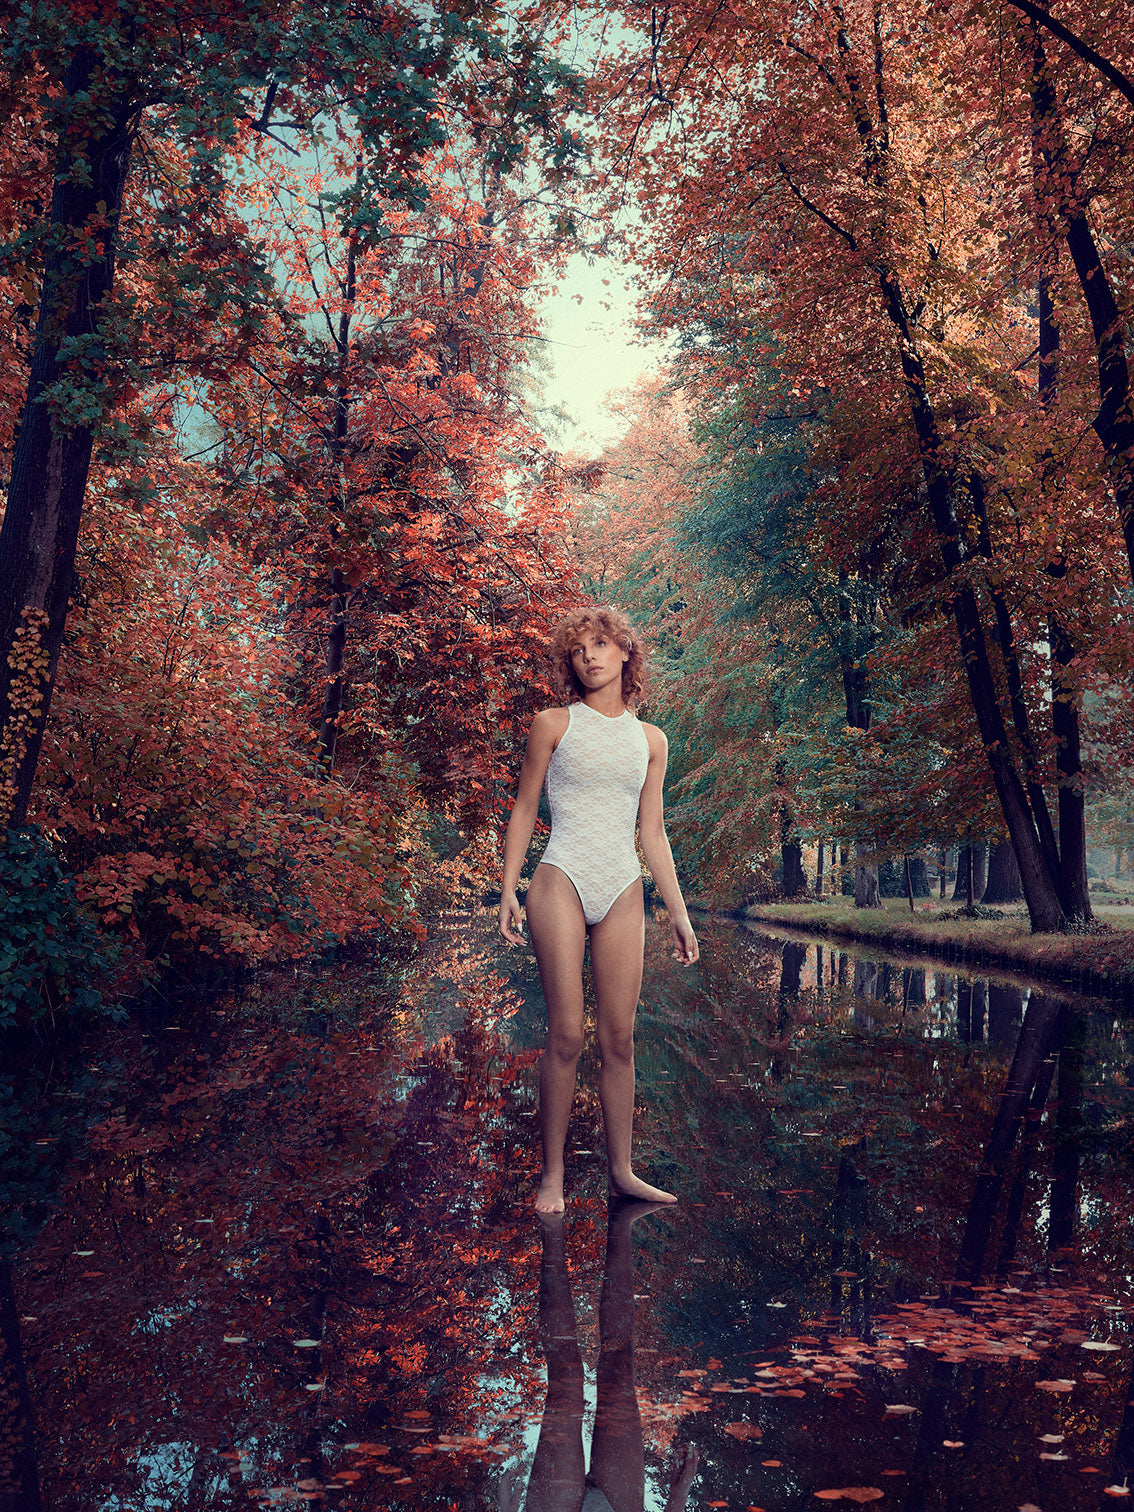 Image of model Lo standing on the water with trees in fall colors in the background